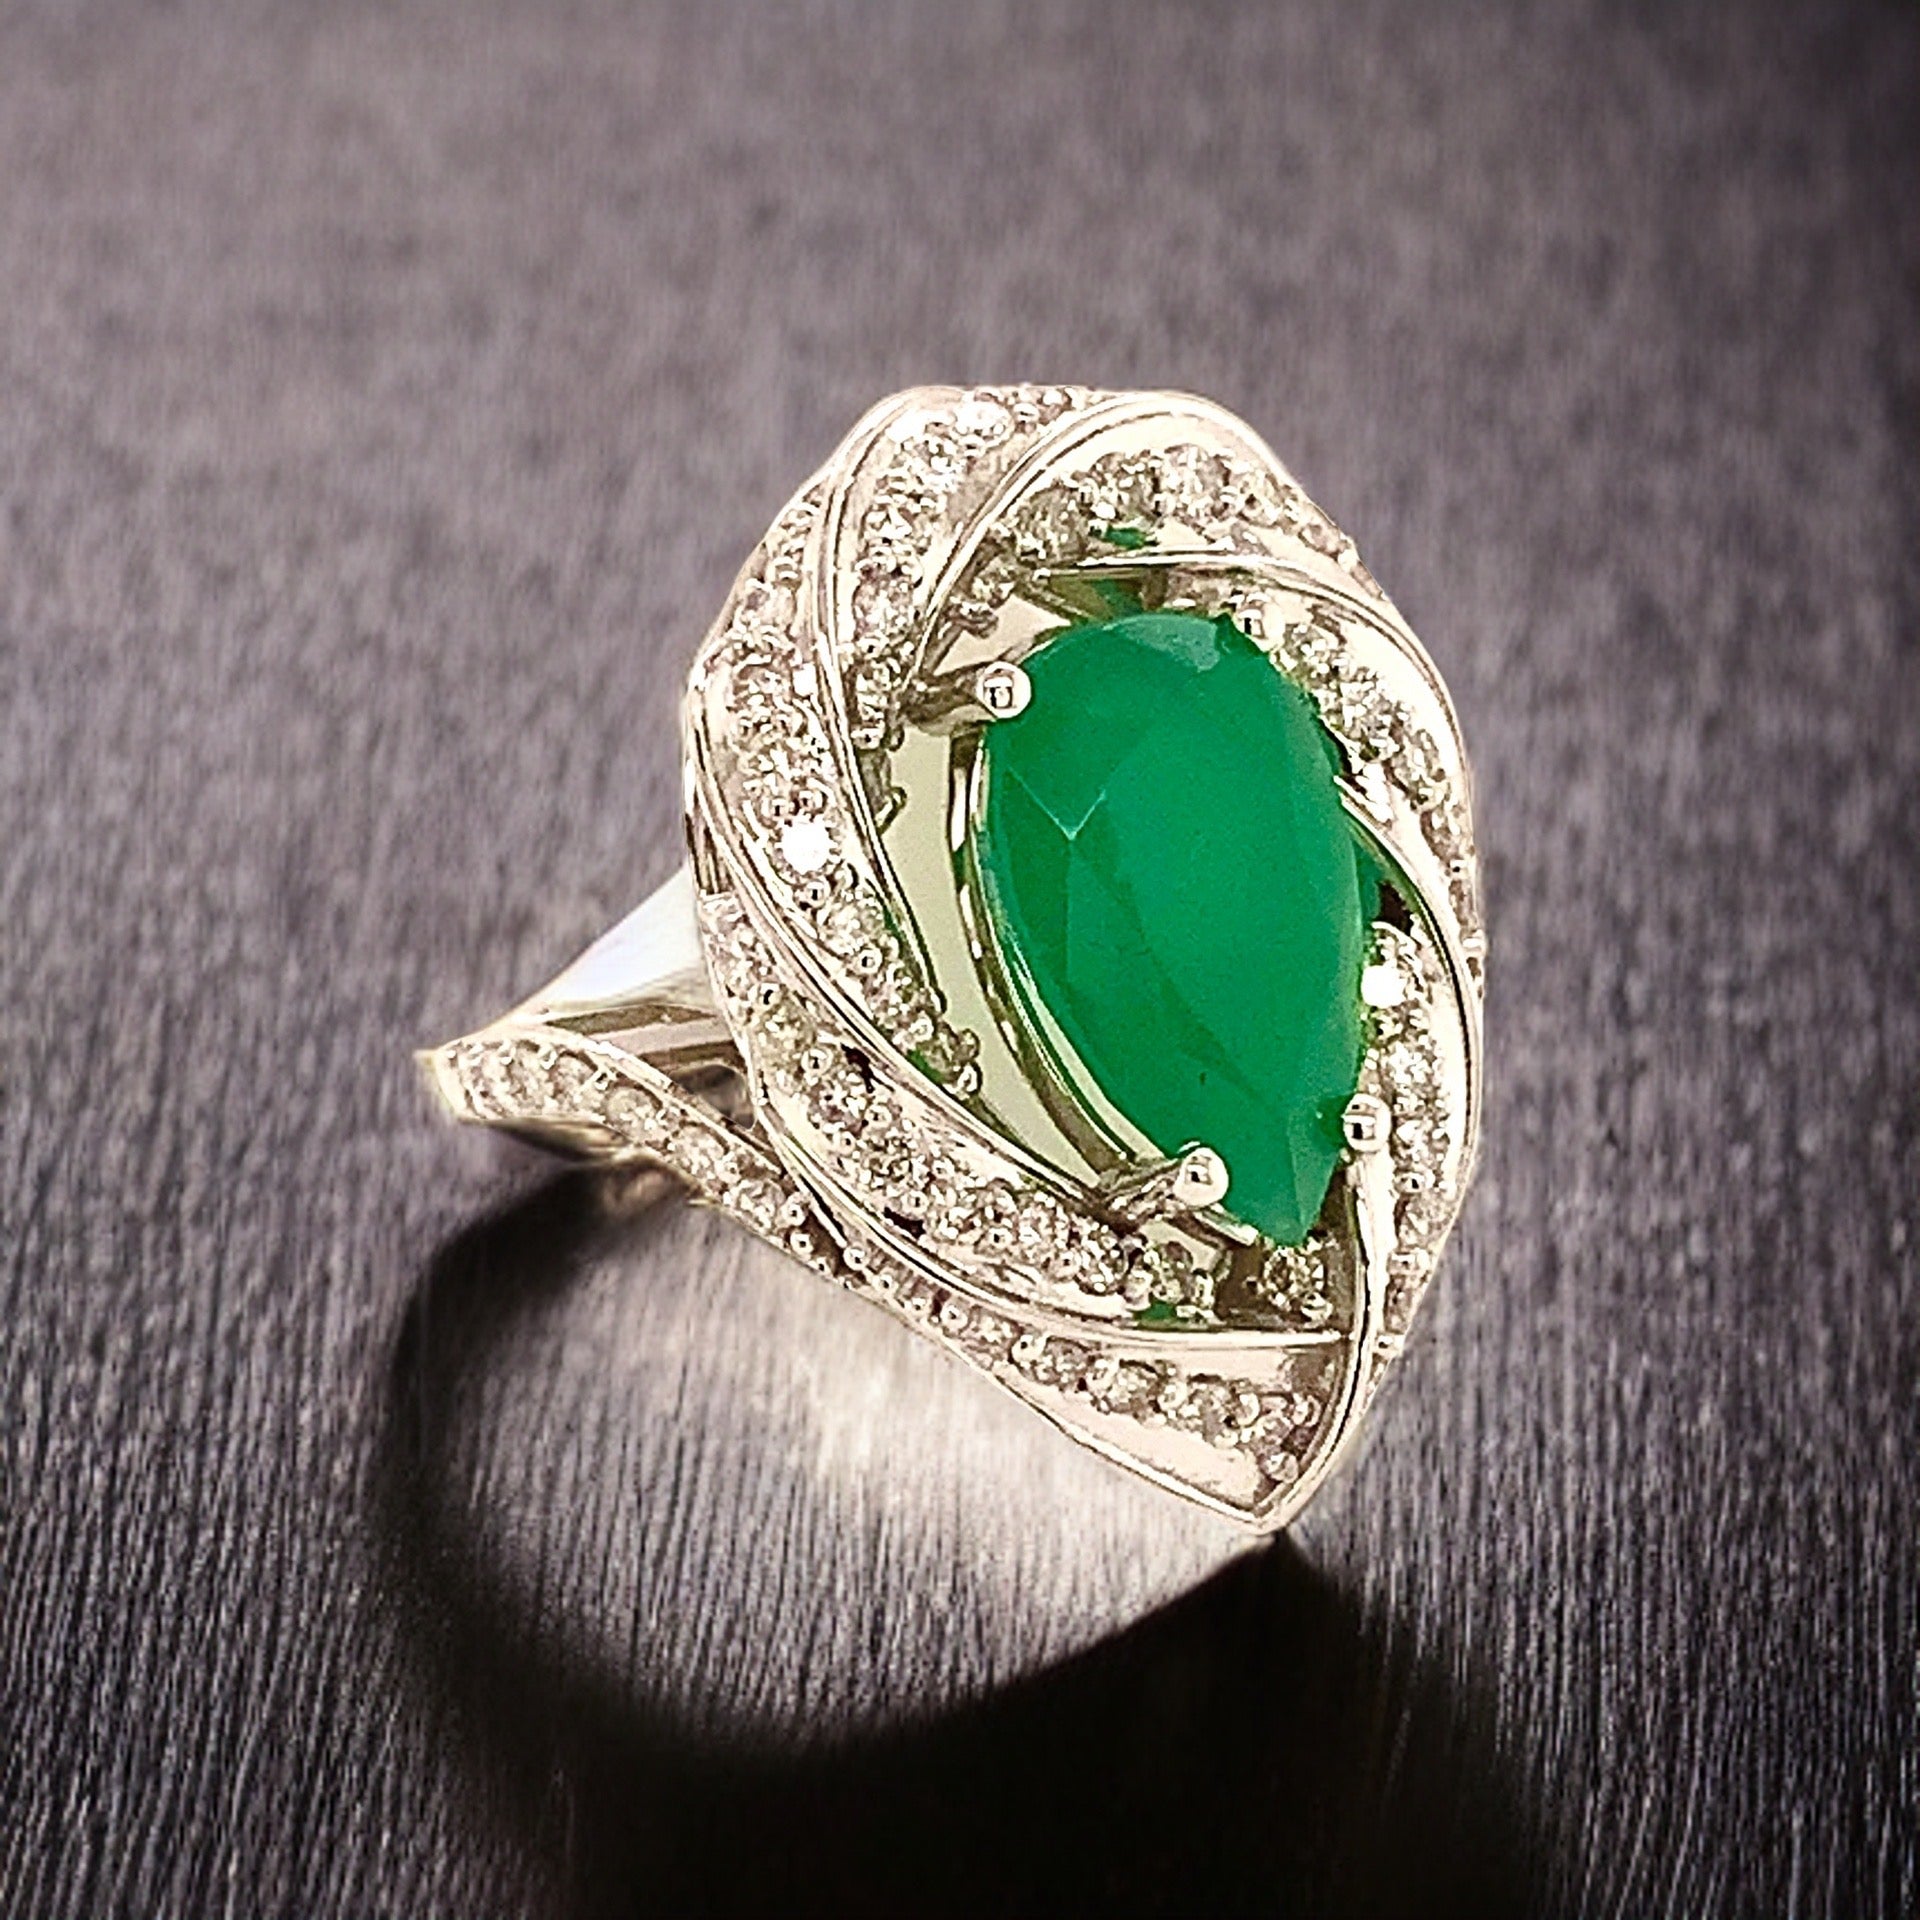 Natural Emerald Diamond Ring Size 6.75 14k Gold 6.1 TCW Certified $6,950 114425 - Certified Fine Jewelry